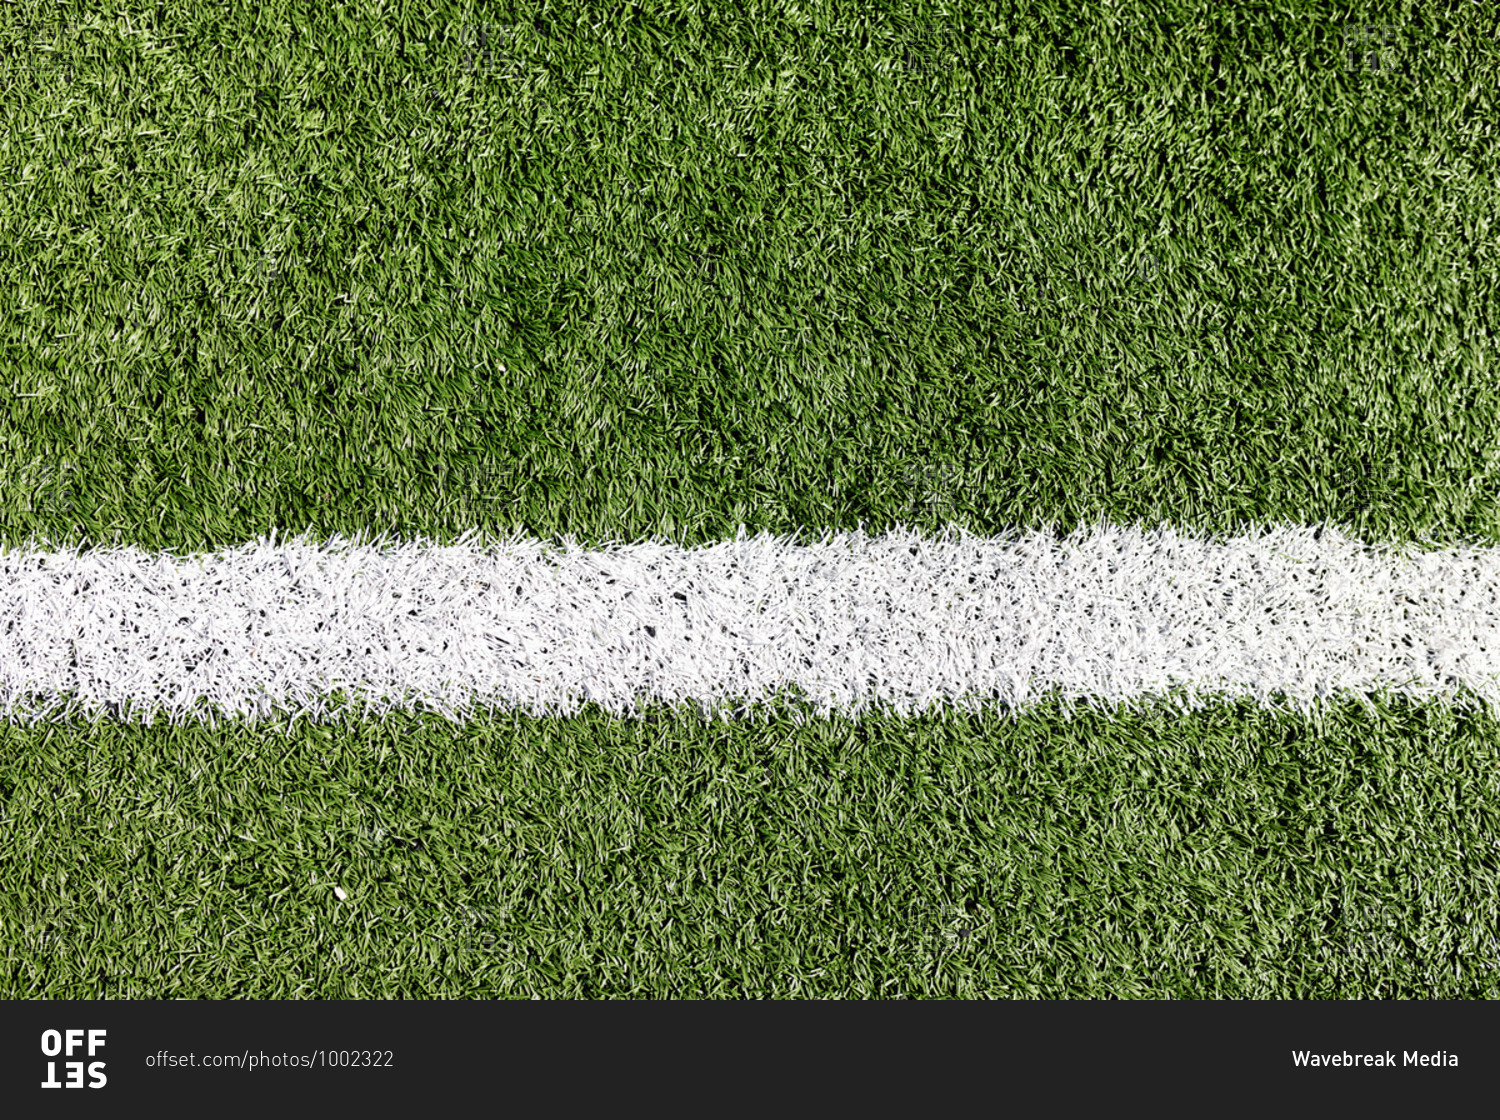 Close up of a white line drawn on a grass football pitch on a sunny day. Sports stadium football ground.